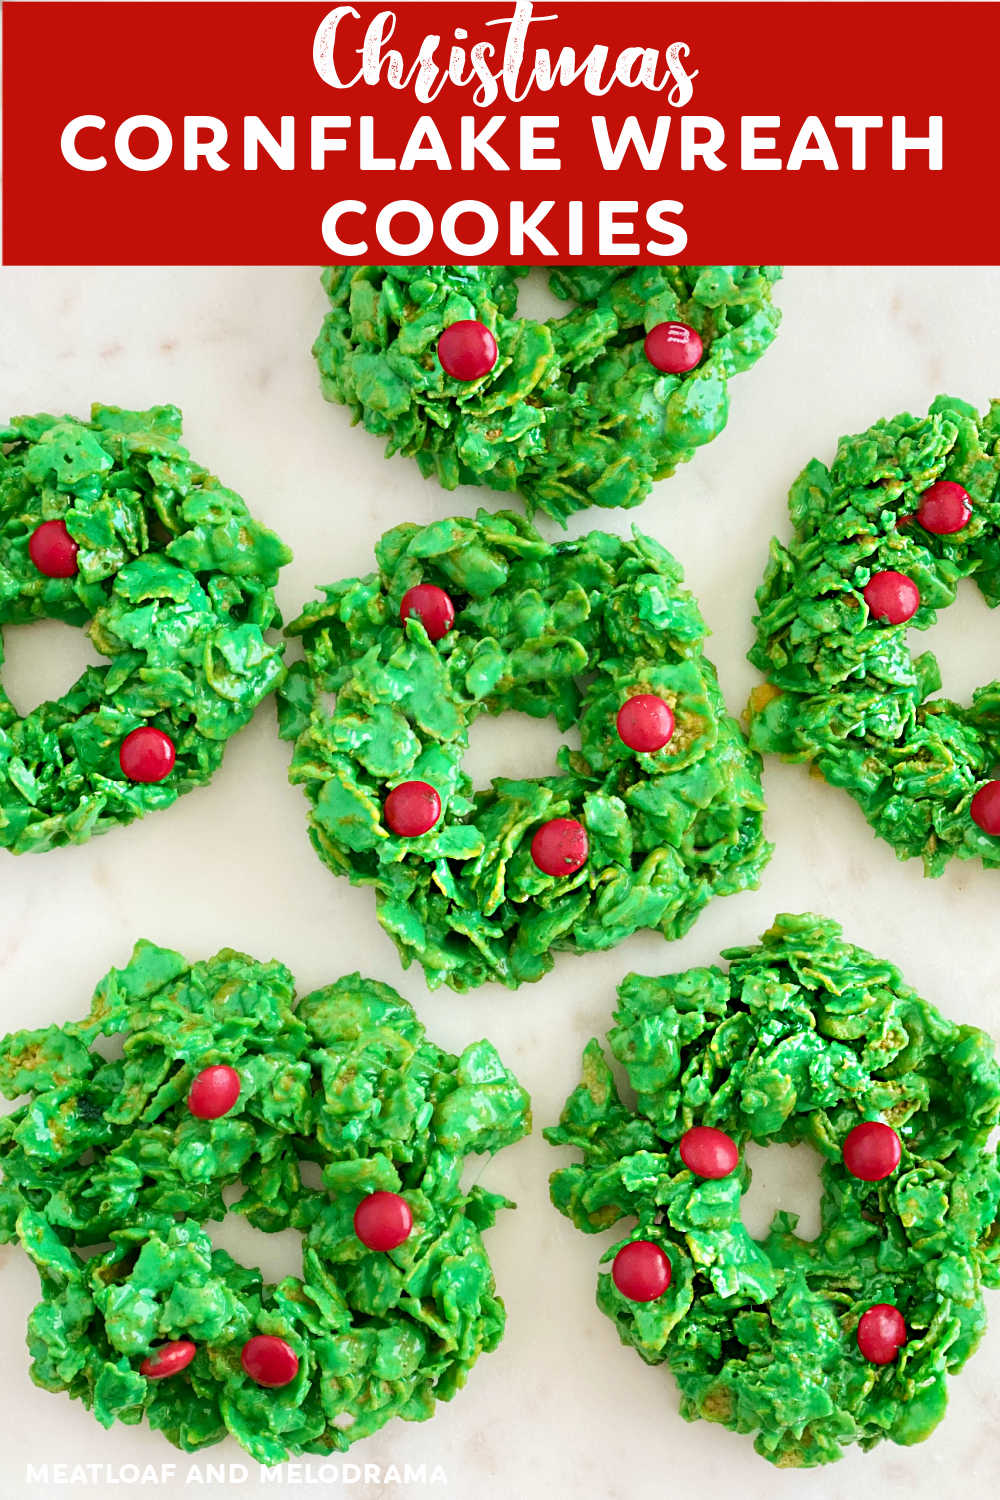 Christmas Cornflake Wreath Cookies are easy no bake treats made with corn flakes cereal, marshmallows, green food coloring and red candies. These cute Christmas wreaths are perfect for the holiday season and a fun addition to your holiday dessert table! via @meamel